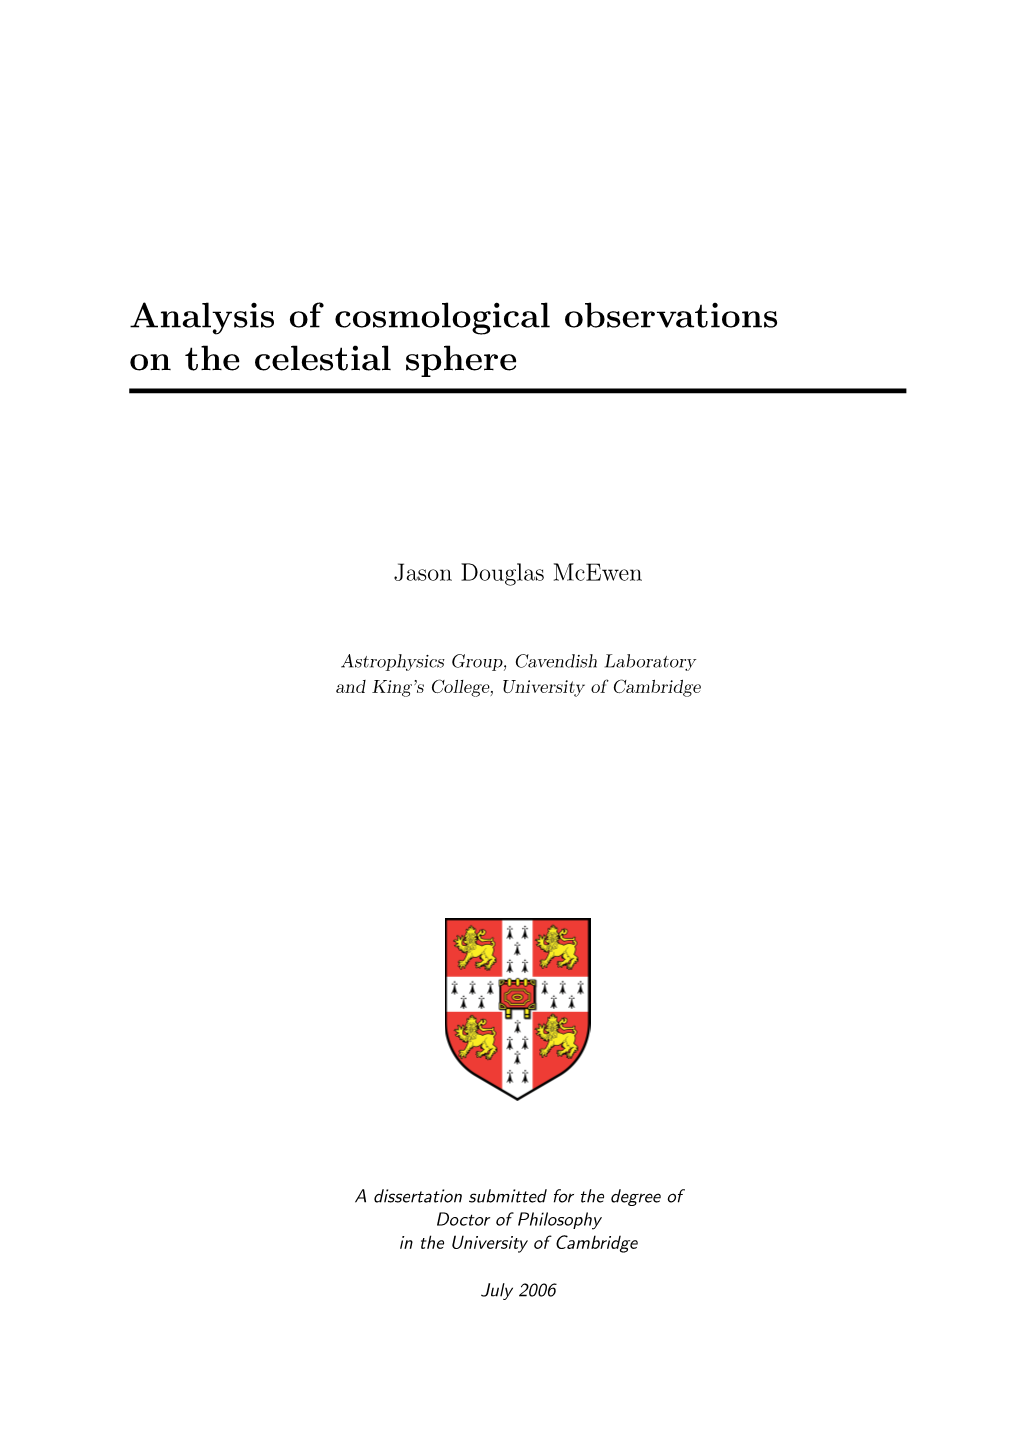 Analysis of Cosmological Observations on the Celestial Sphere